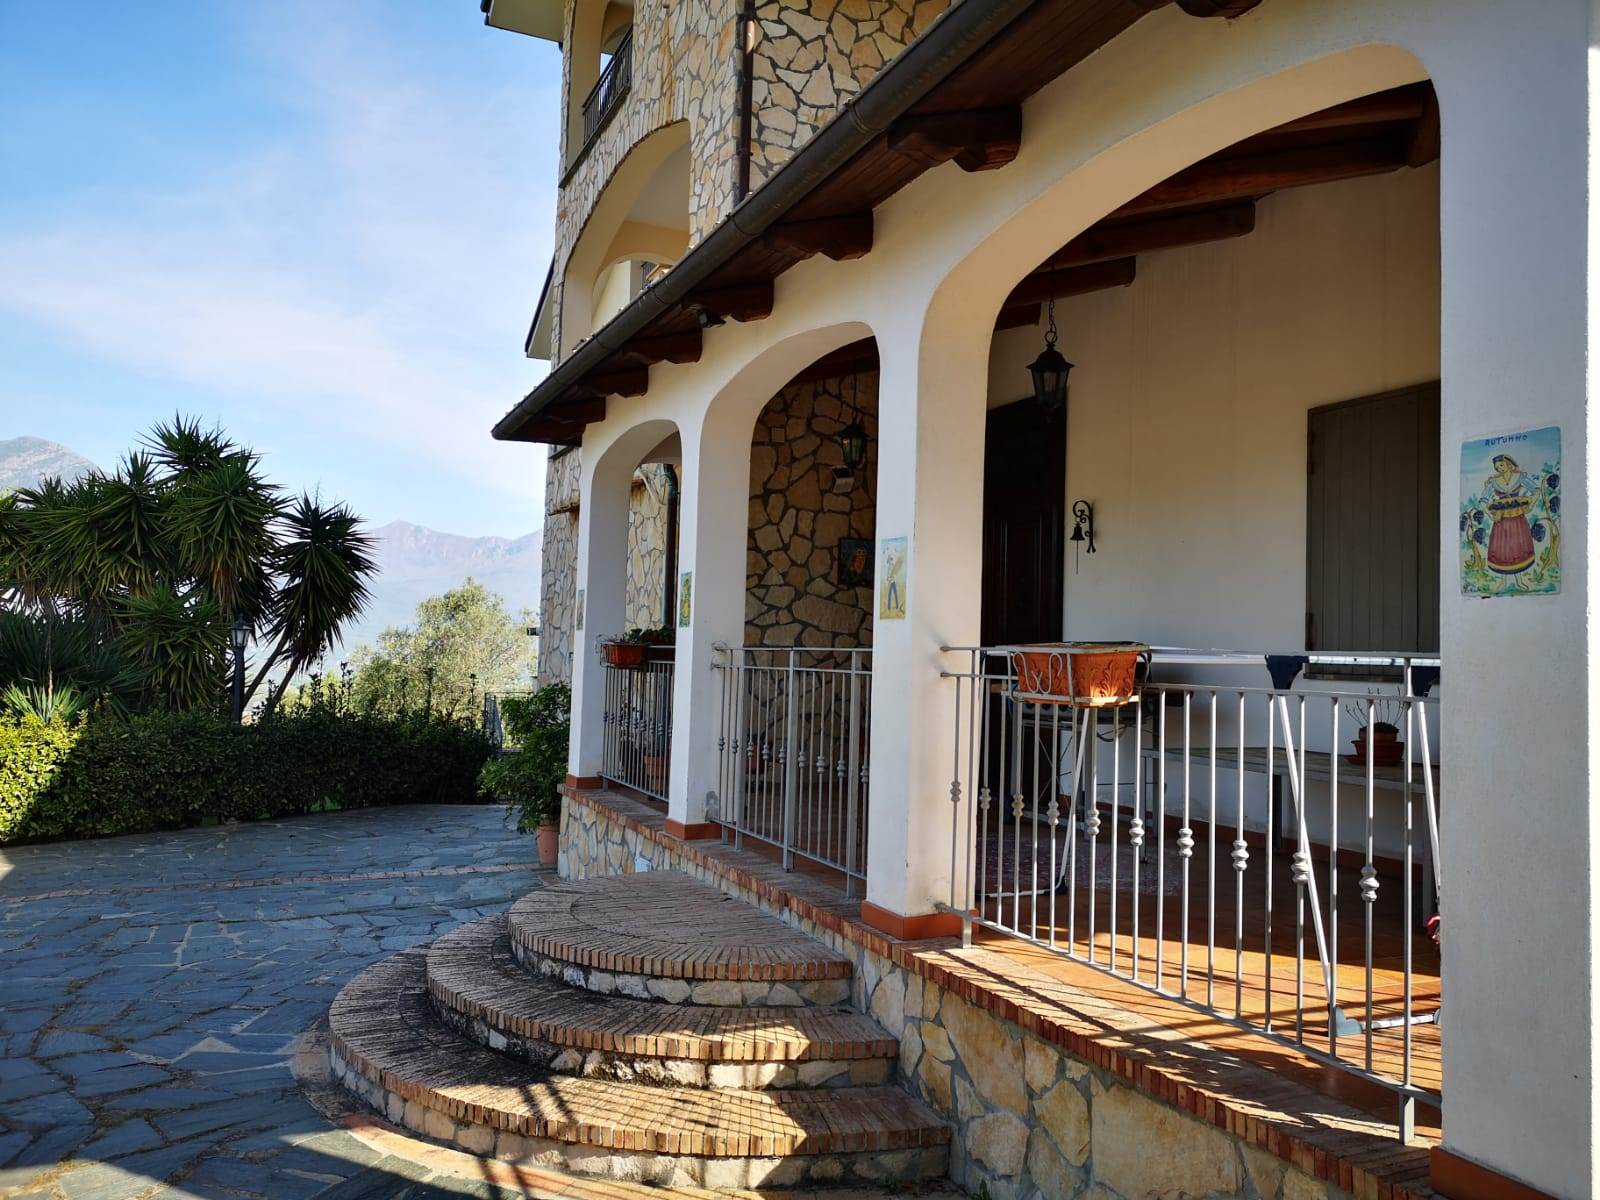 SANTA MARIA A VICO, GIFFONI VALLE PIANA, Villa for sale of 696 Sq. mt., Excellent Condition, Heating Individual heating system, composed by: 10 Rooms,